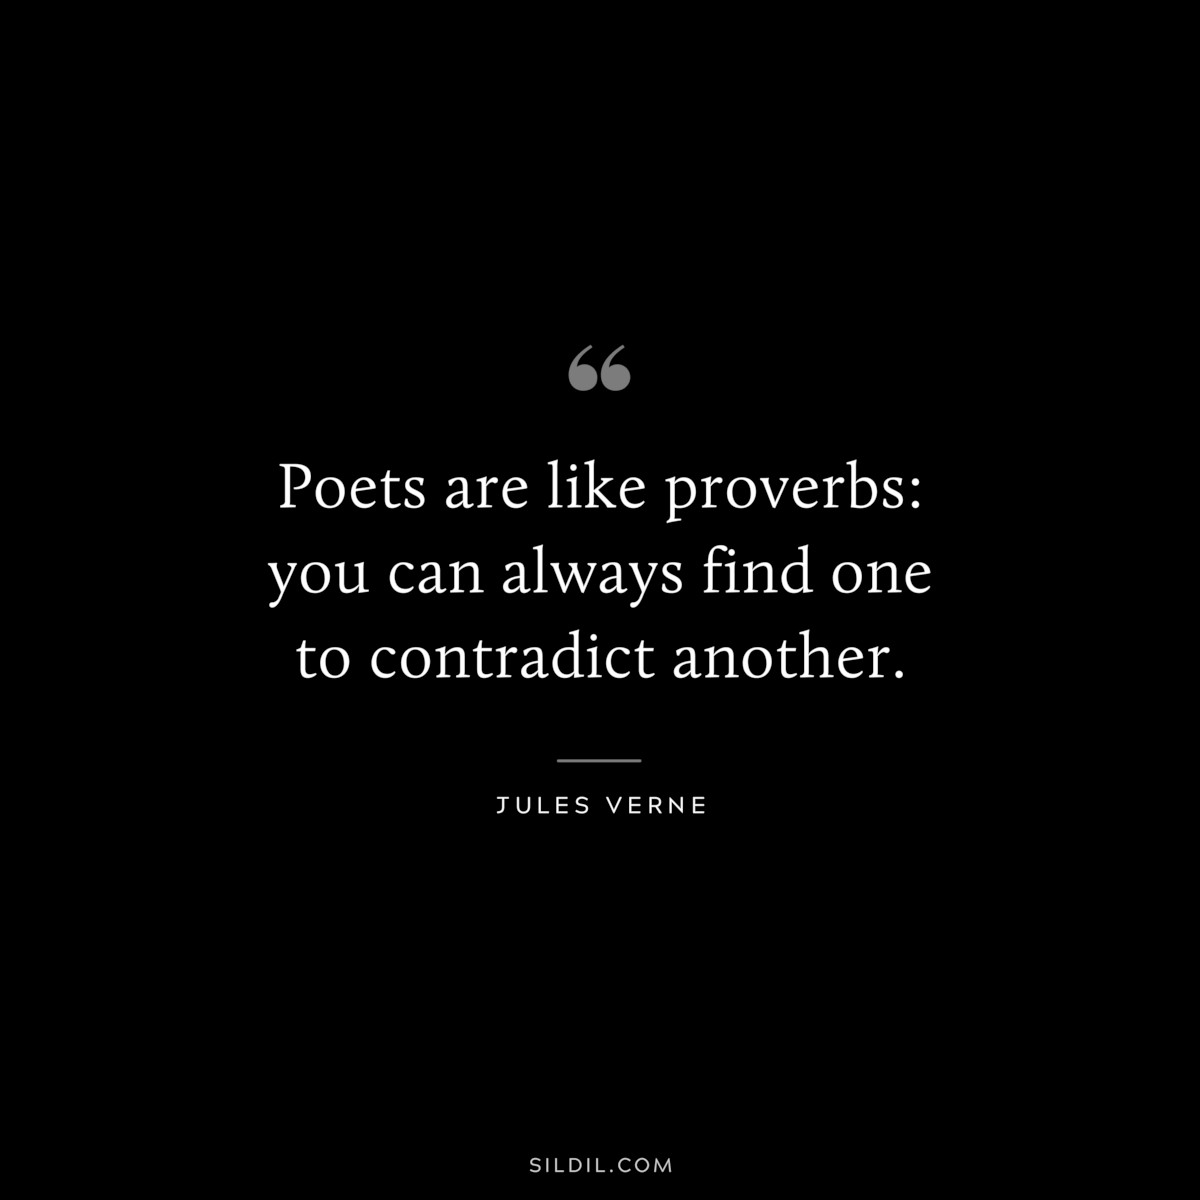 Poets are like proverbs: you can always find one to contradict another.